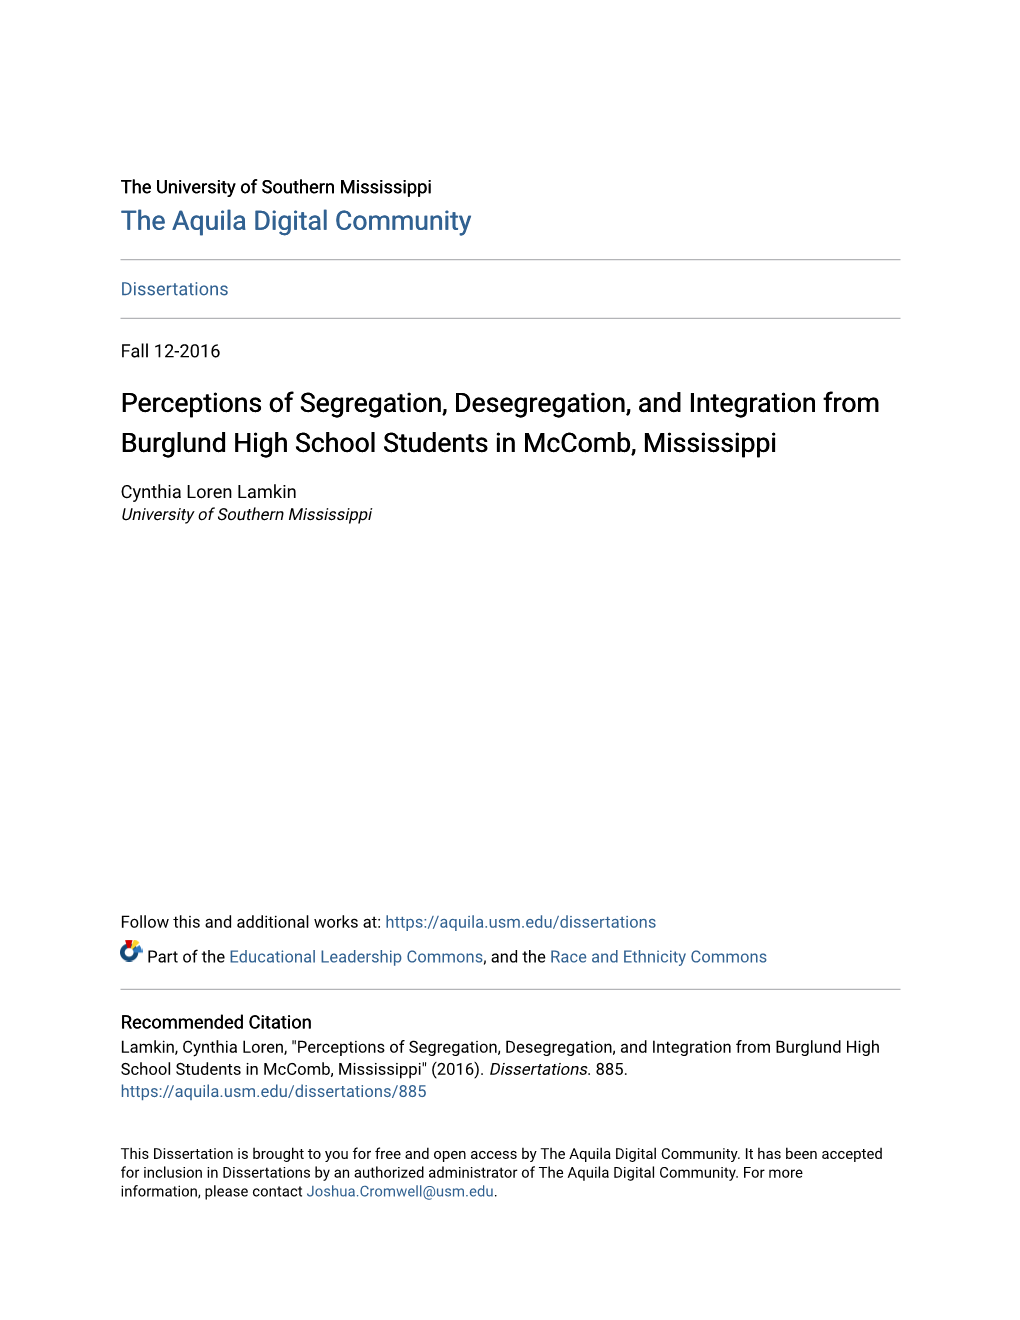 Perceptions of Segregation, Desegregation, and Integration from Burglund High School Students in Mccomb, Mississippi